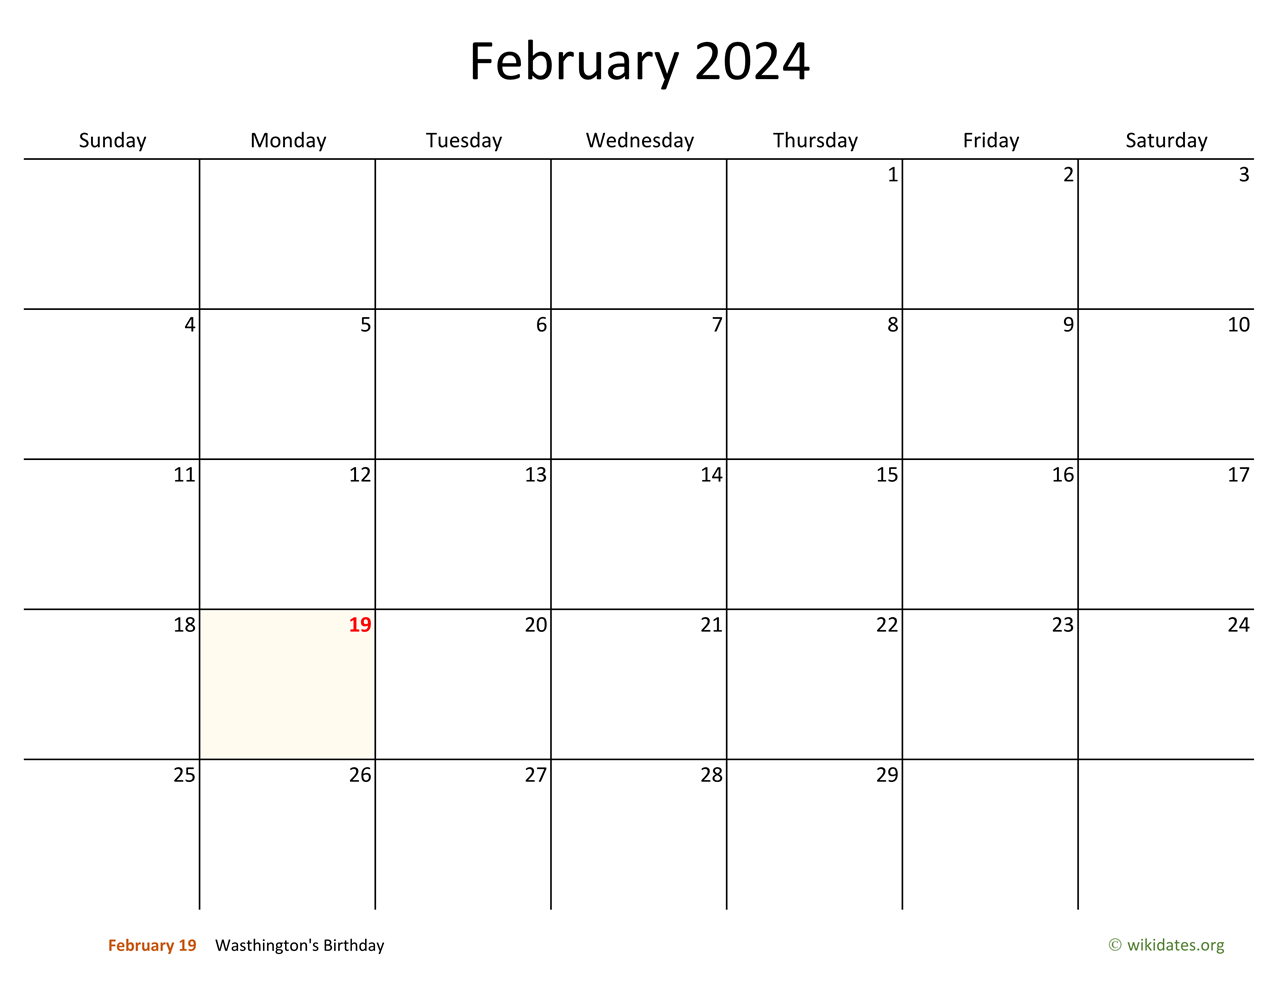 February 2024 Calendar with Bigger boxes | WikiDates.org